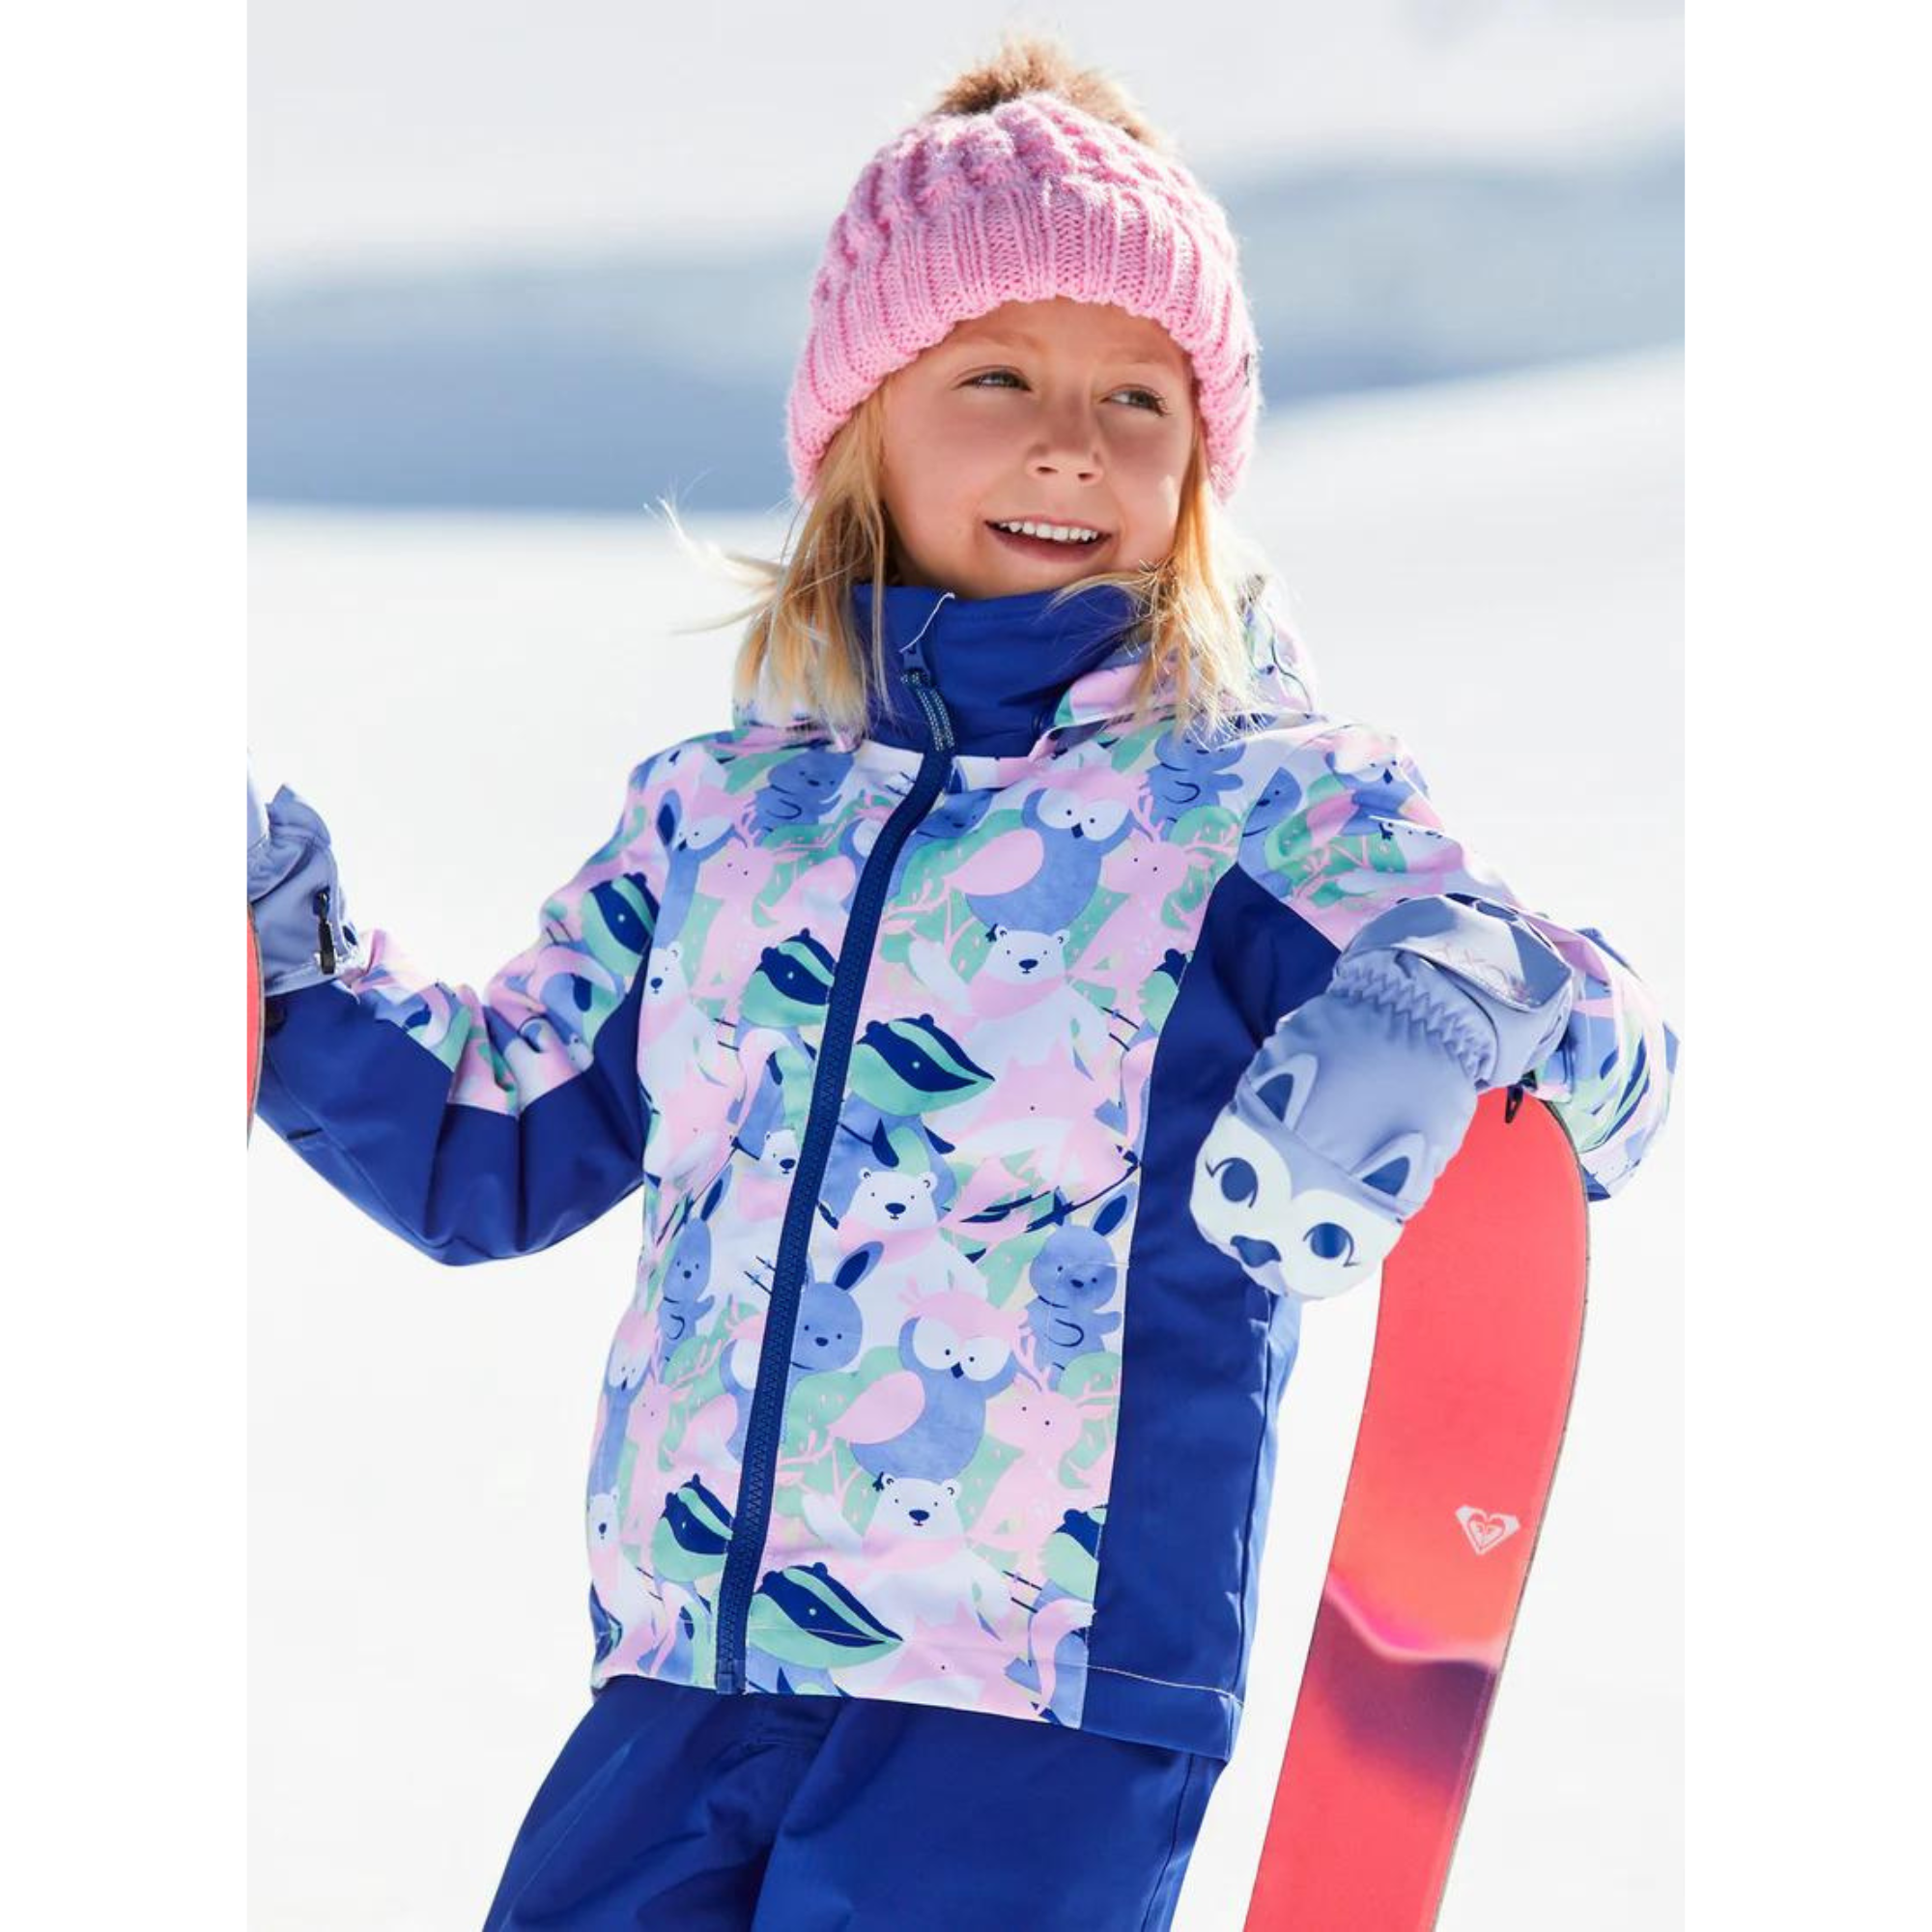 Roxy Girl's Snowy Tale Jacket - Bright White Mountains